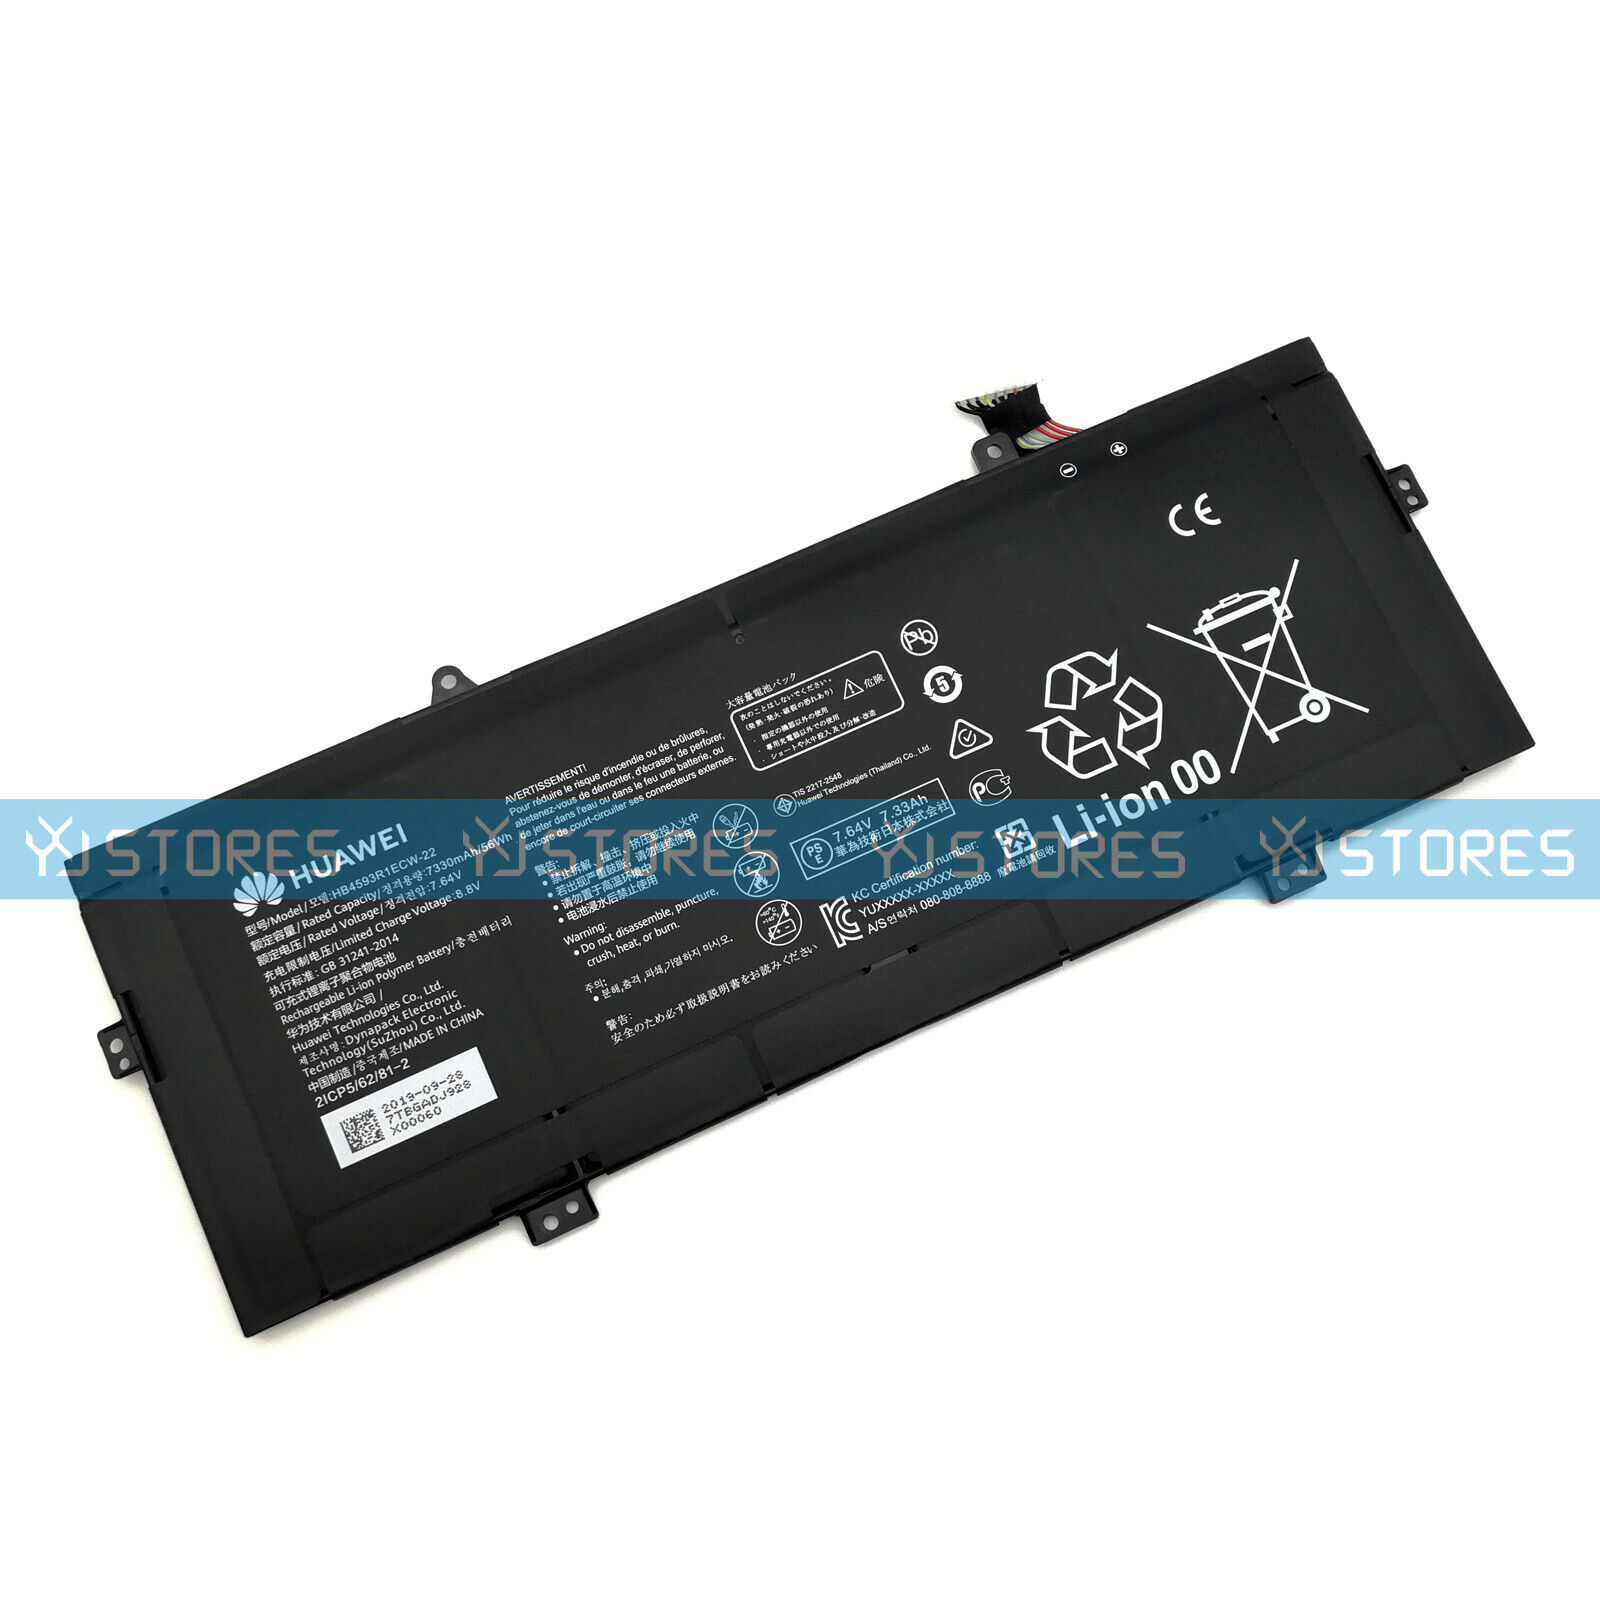 Genuine HB4593R1ECW-22A Battery for Huawei MateBook 14 X Pro 2020 2021 KLVL-WFH9